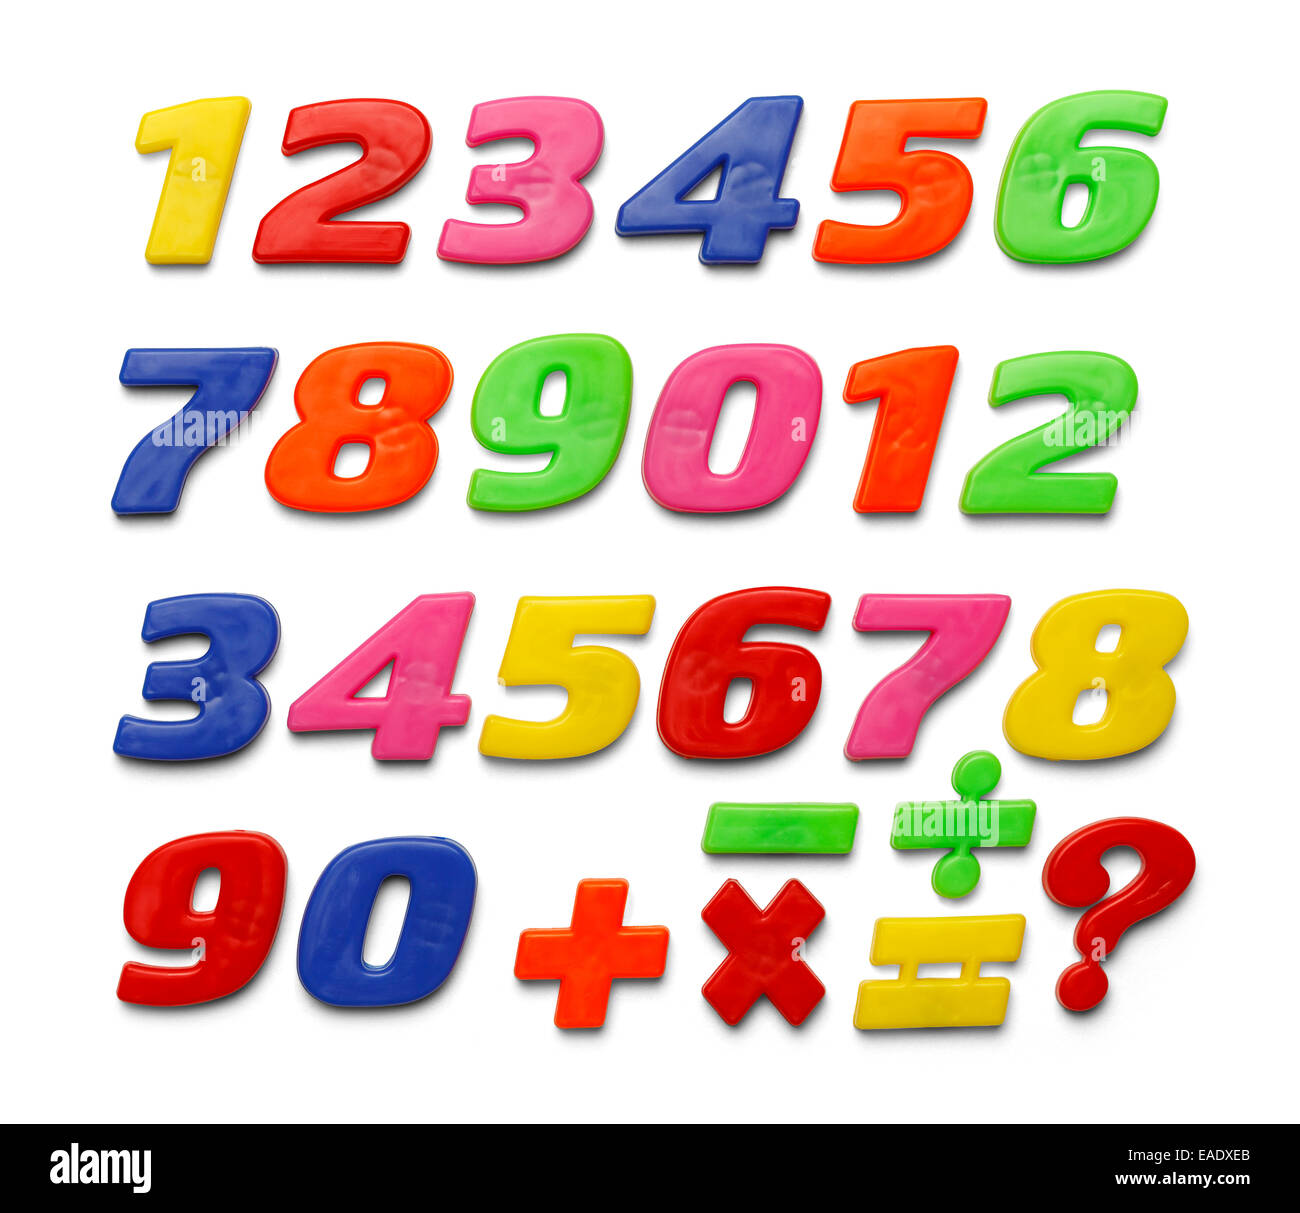 Colored Plastic Magnetic Numbers Isolated on White Background. Stock Photo